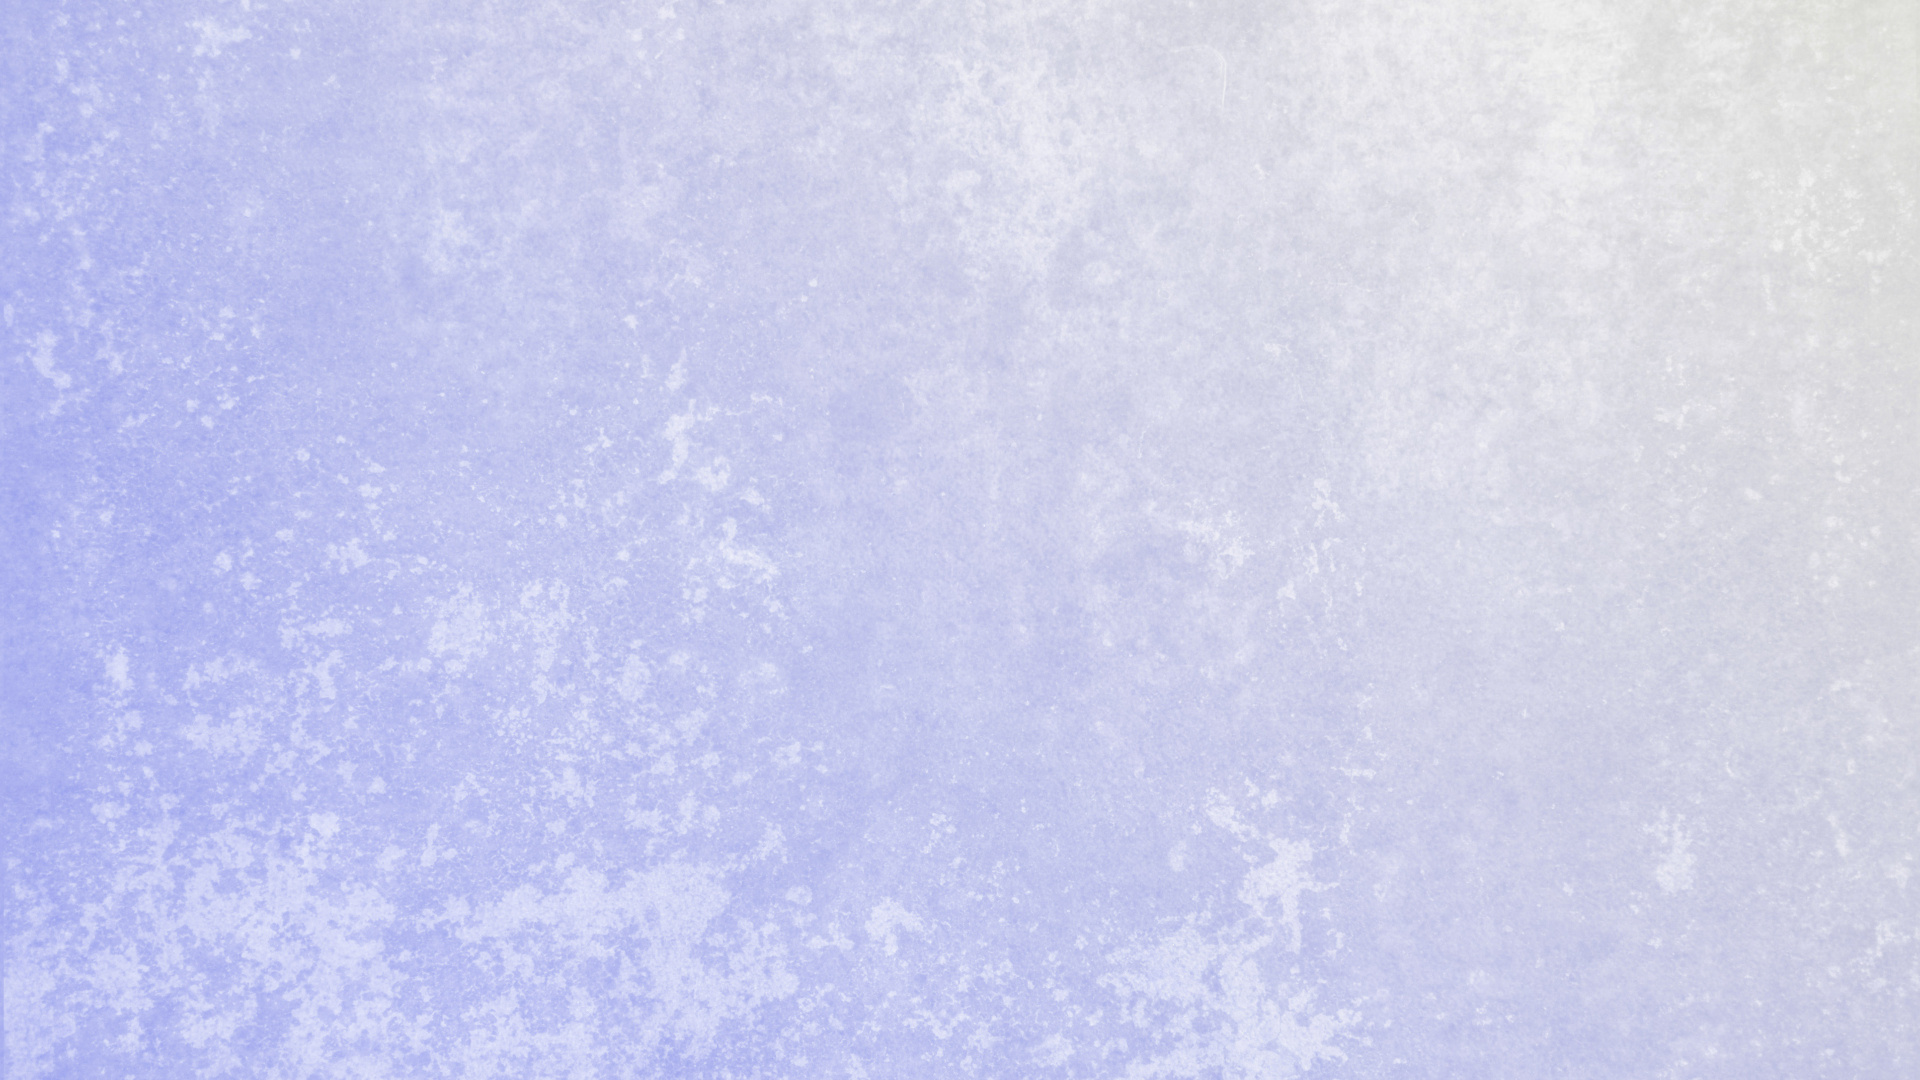 Blue Textile With White Paint. Wallpaper in 1920x1080 Resolution